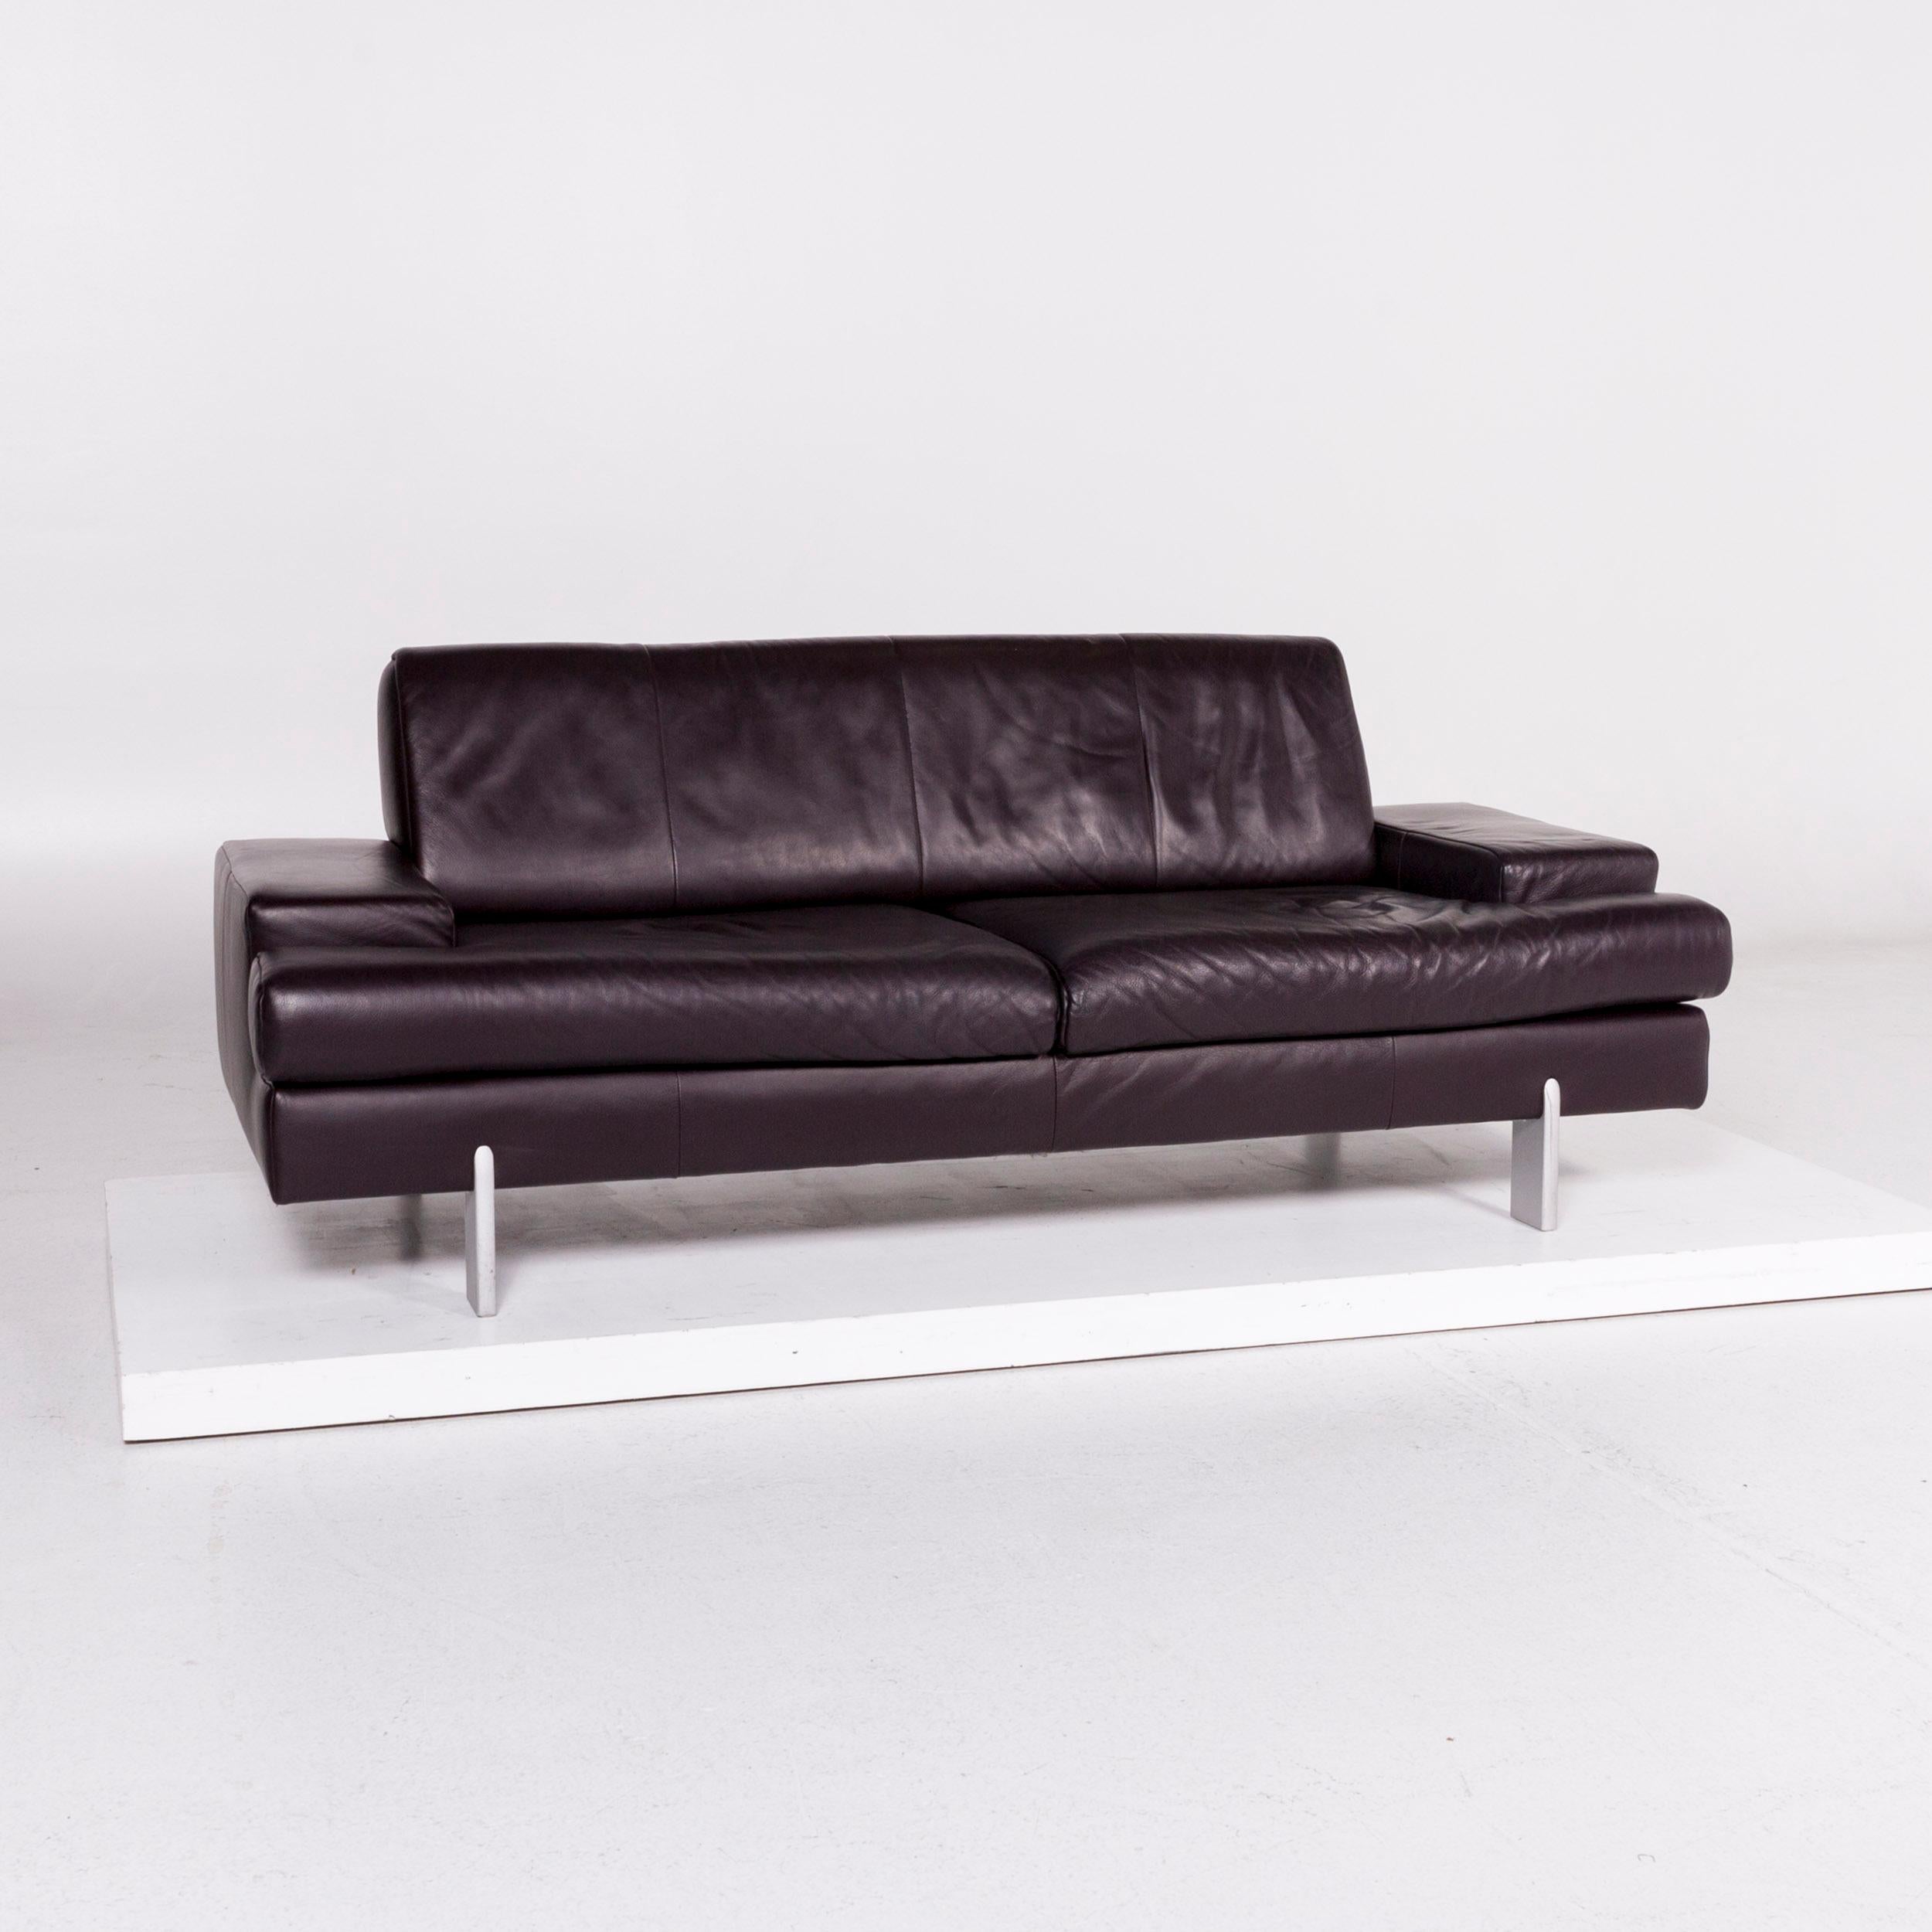 We bring to you a BMP Rolf Benz leather sofa aubergine three-seat couch.

 
 Product measurements in centimeters:
 
Depth 78
Width 199
Height 79
Seat-height 44
Rest-height 51
Seat-depth 58
Seat-width 148
Back-height 36.